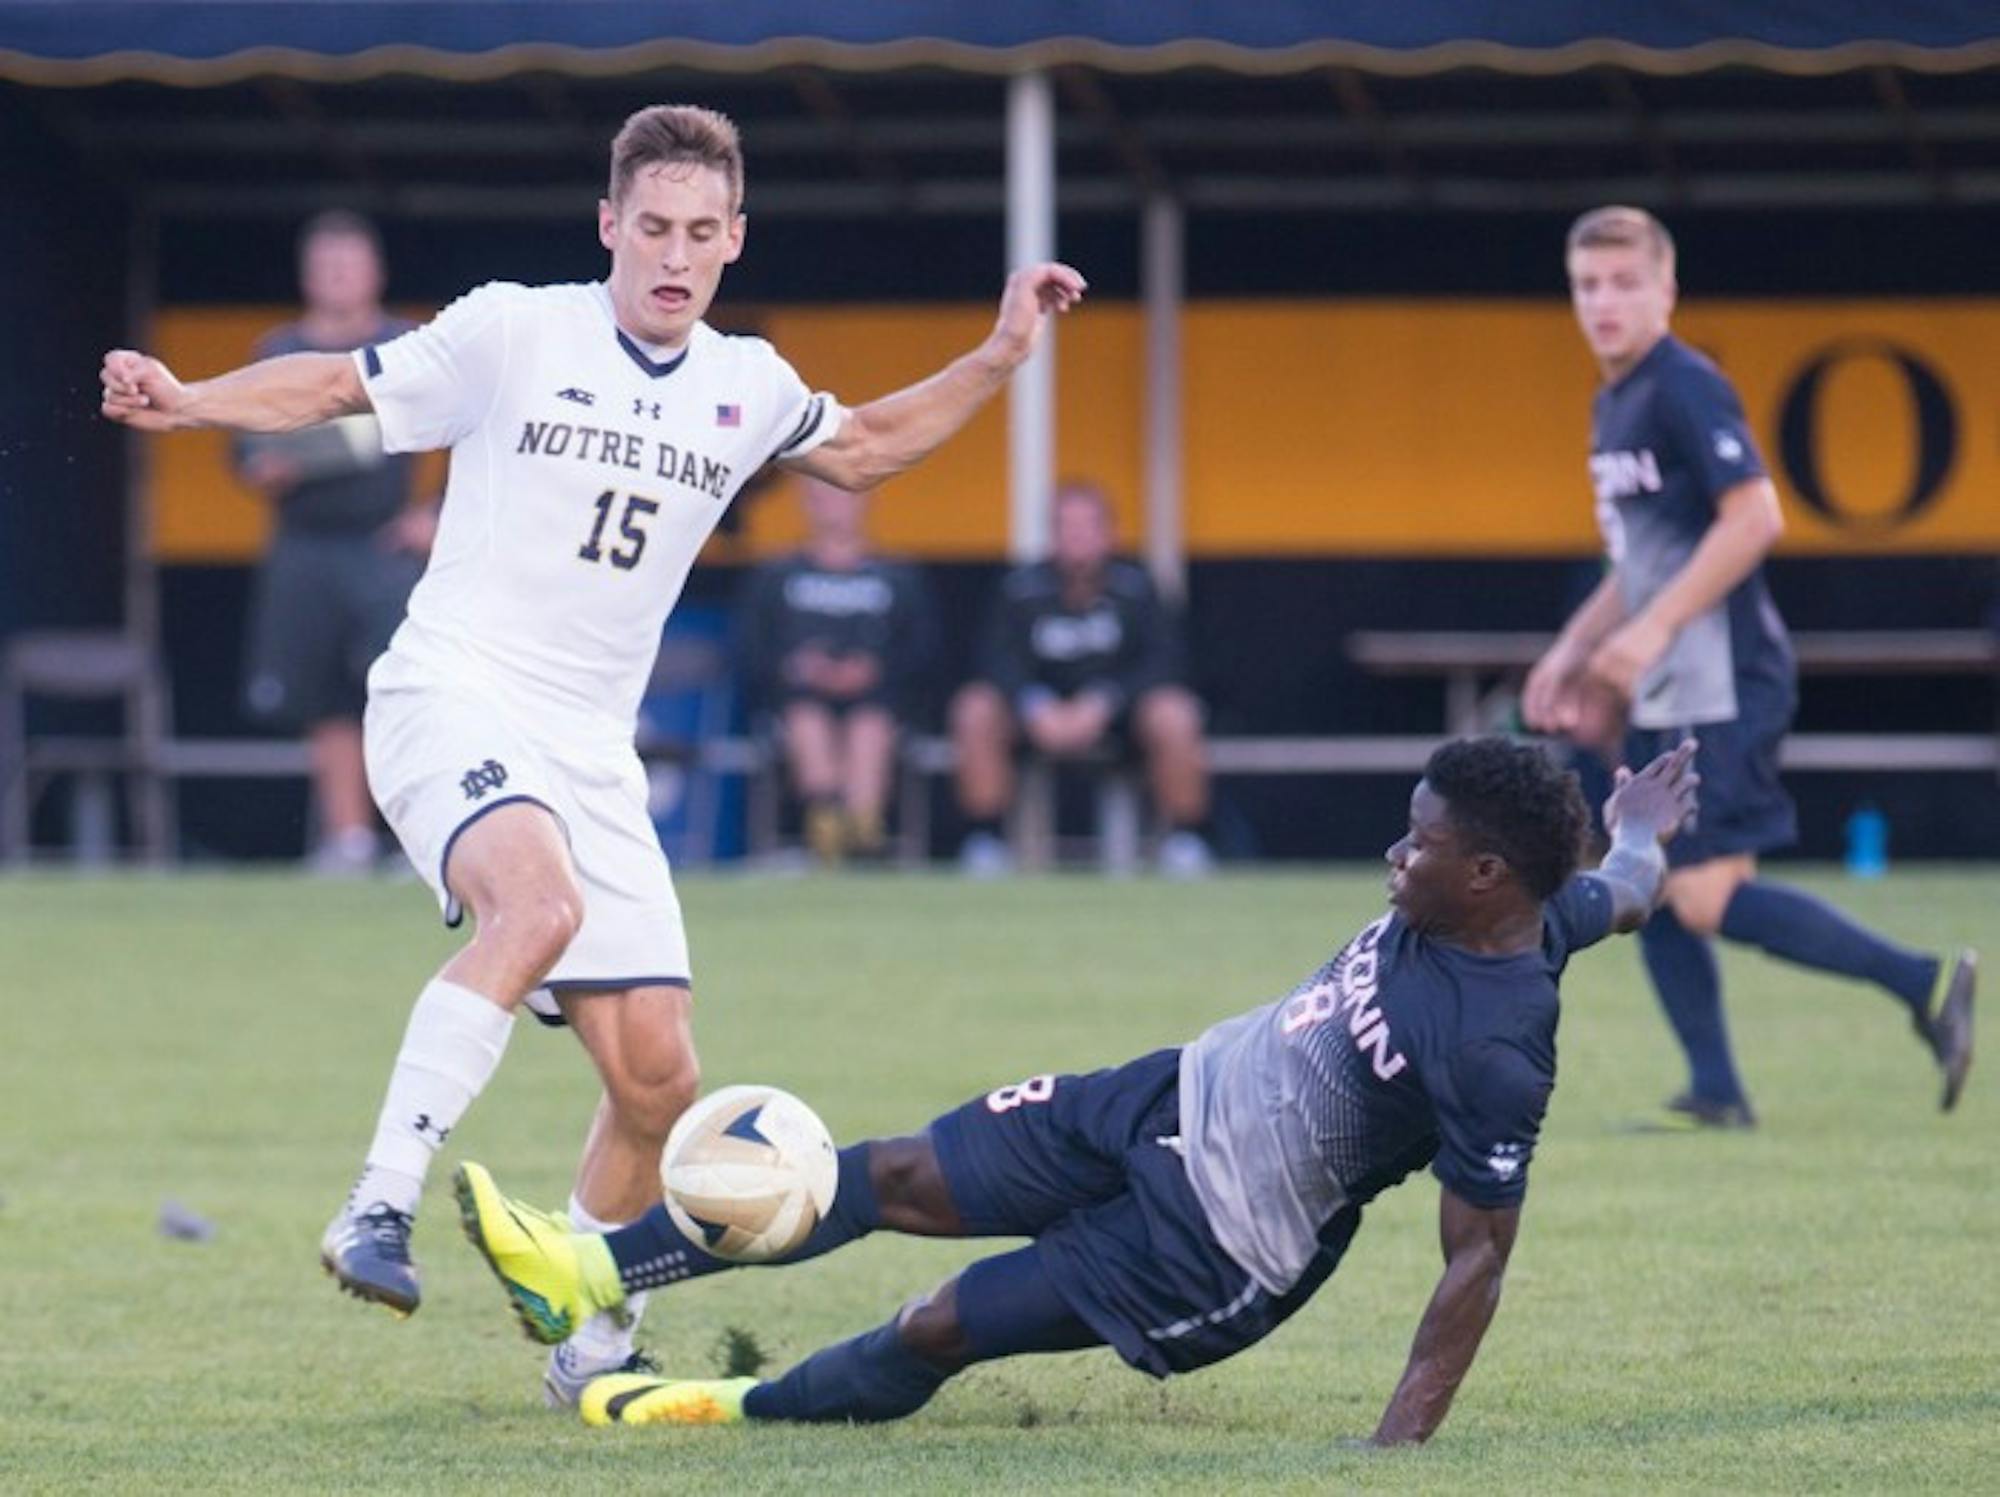 Irish graduate student midfielder Evan Panken battles for a loose ball during Notre Dame’s 1-0 double-overtime win over Connecticut on Tuesday. Panken has scored two game-winning goals this season for the Irish.